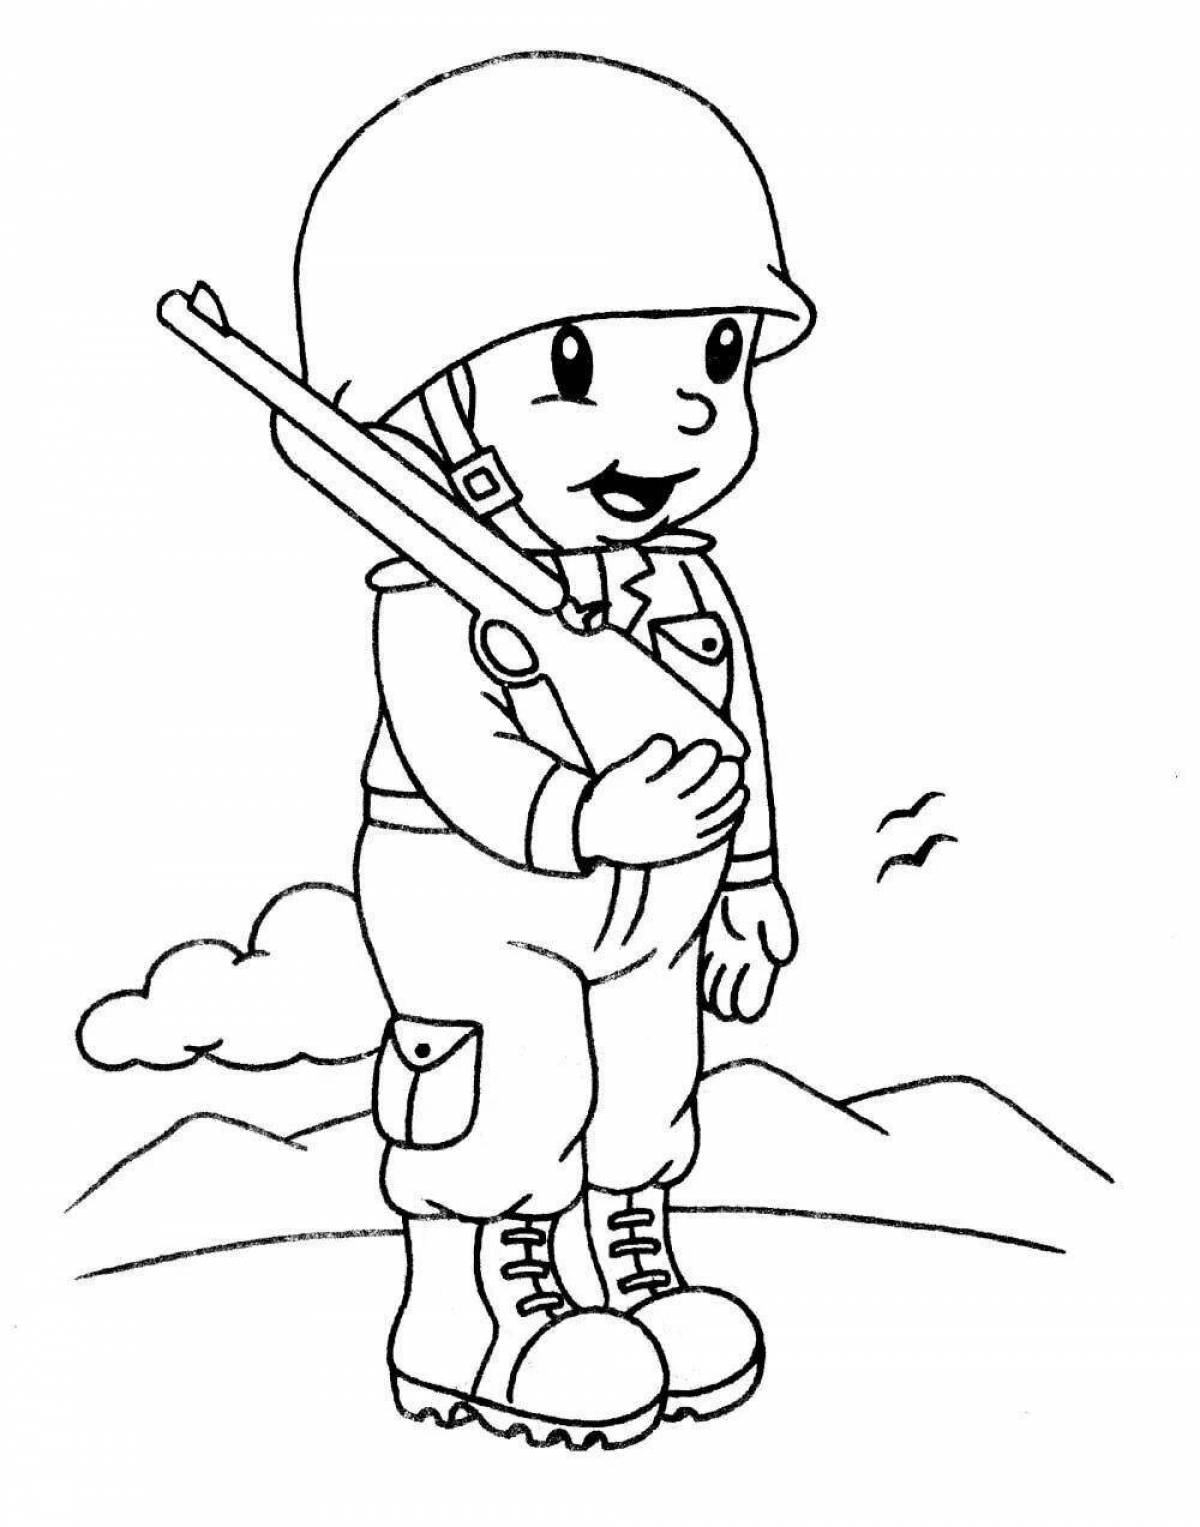 Awesome military profession coloring book